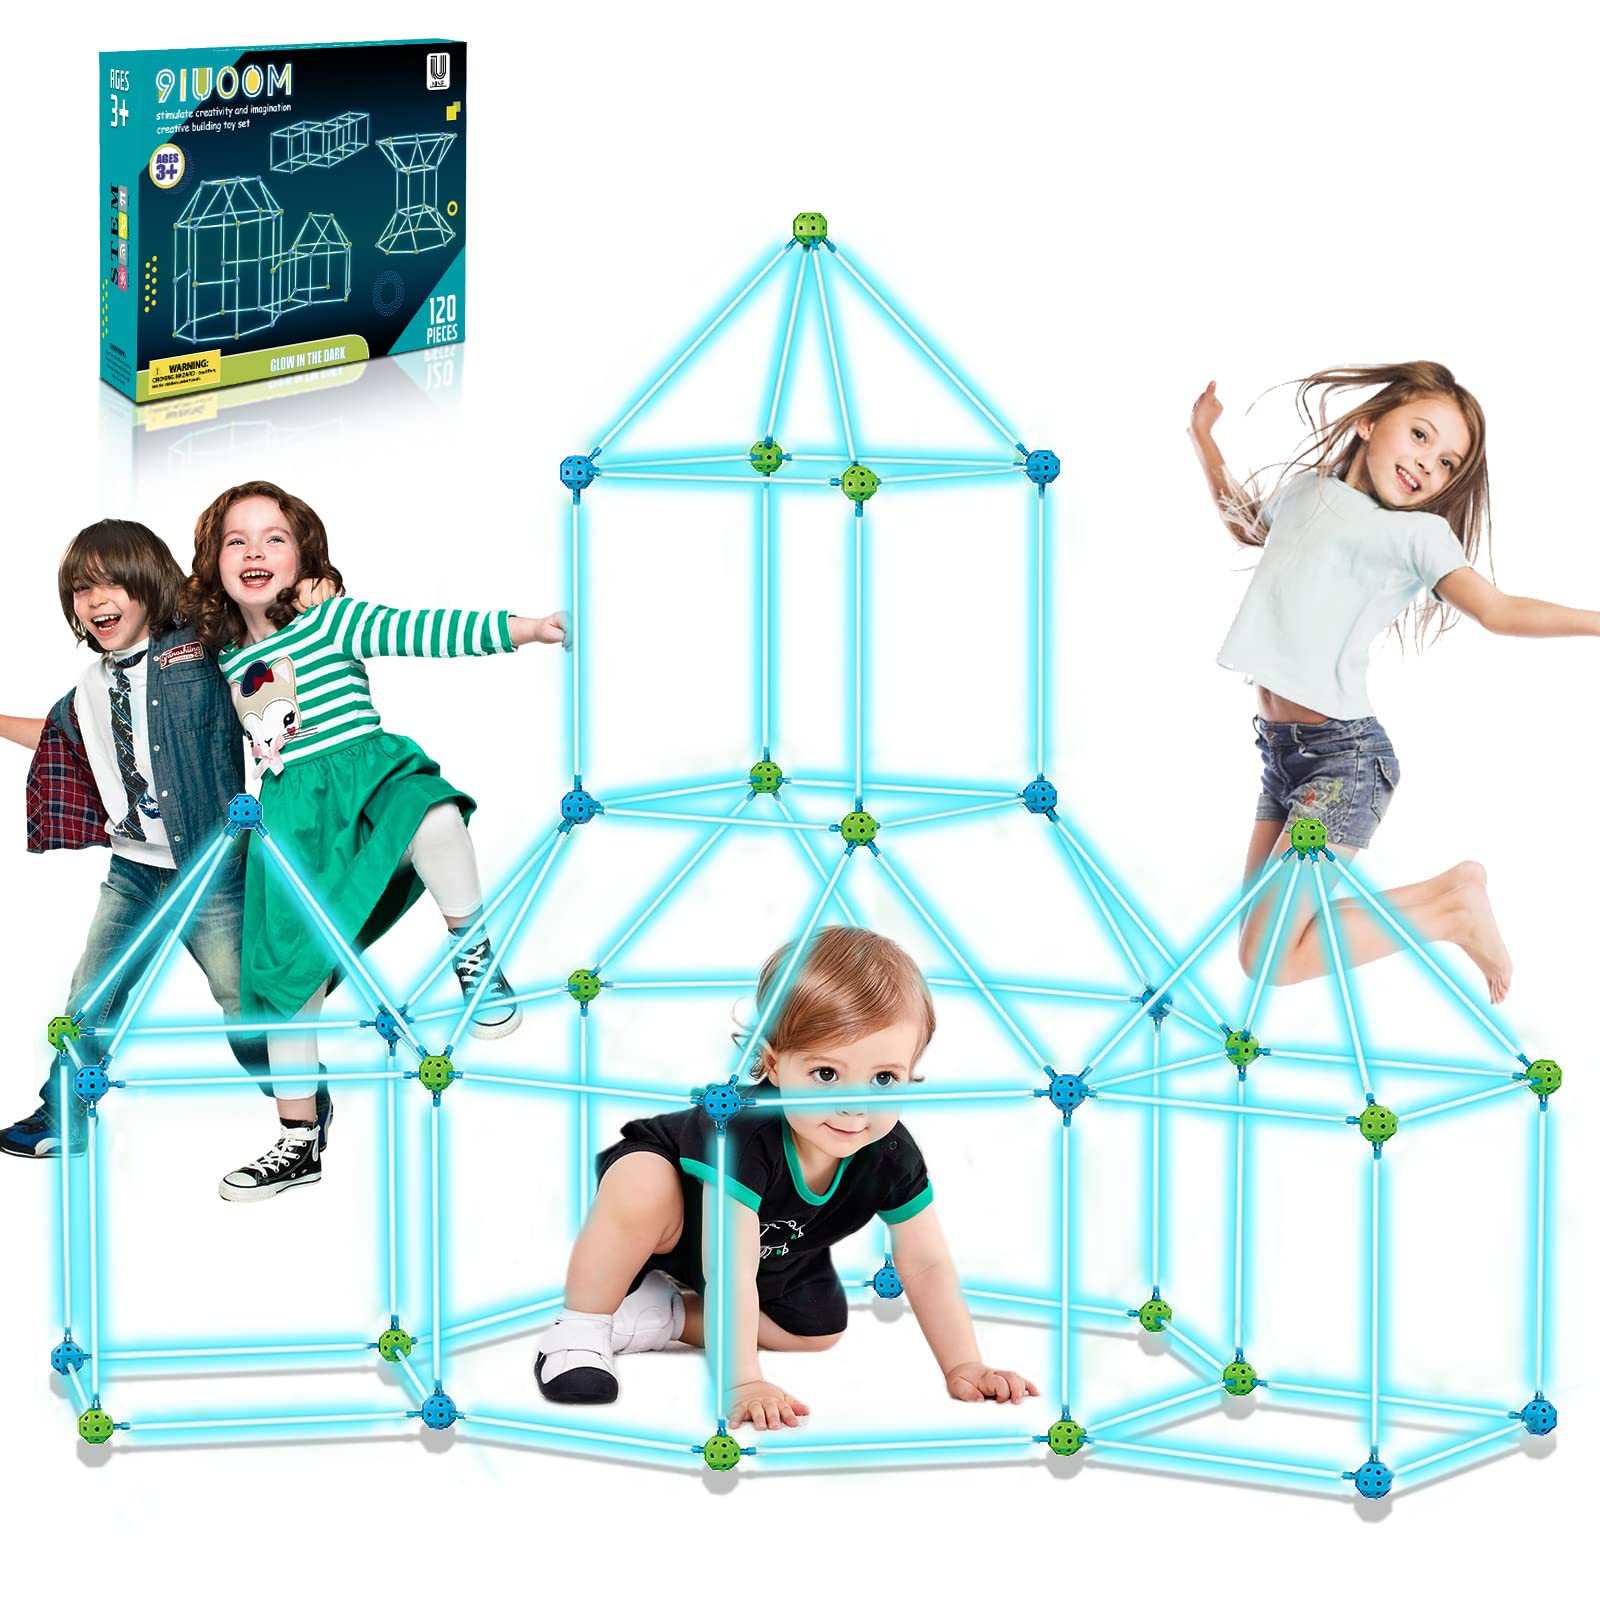 9IUoom Fort Building Kit for Kids 120 Pieces Glow in The Dark Air Forts Builder Gift Construction Toys for 3 4 5 6 7 8 9+ Years Old Boys Girls DIY Fun